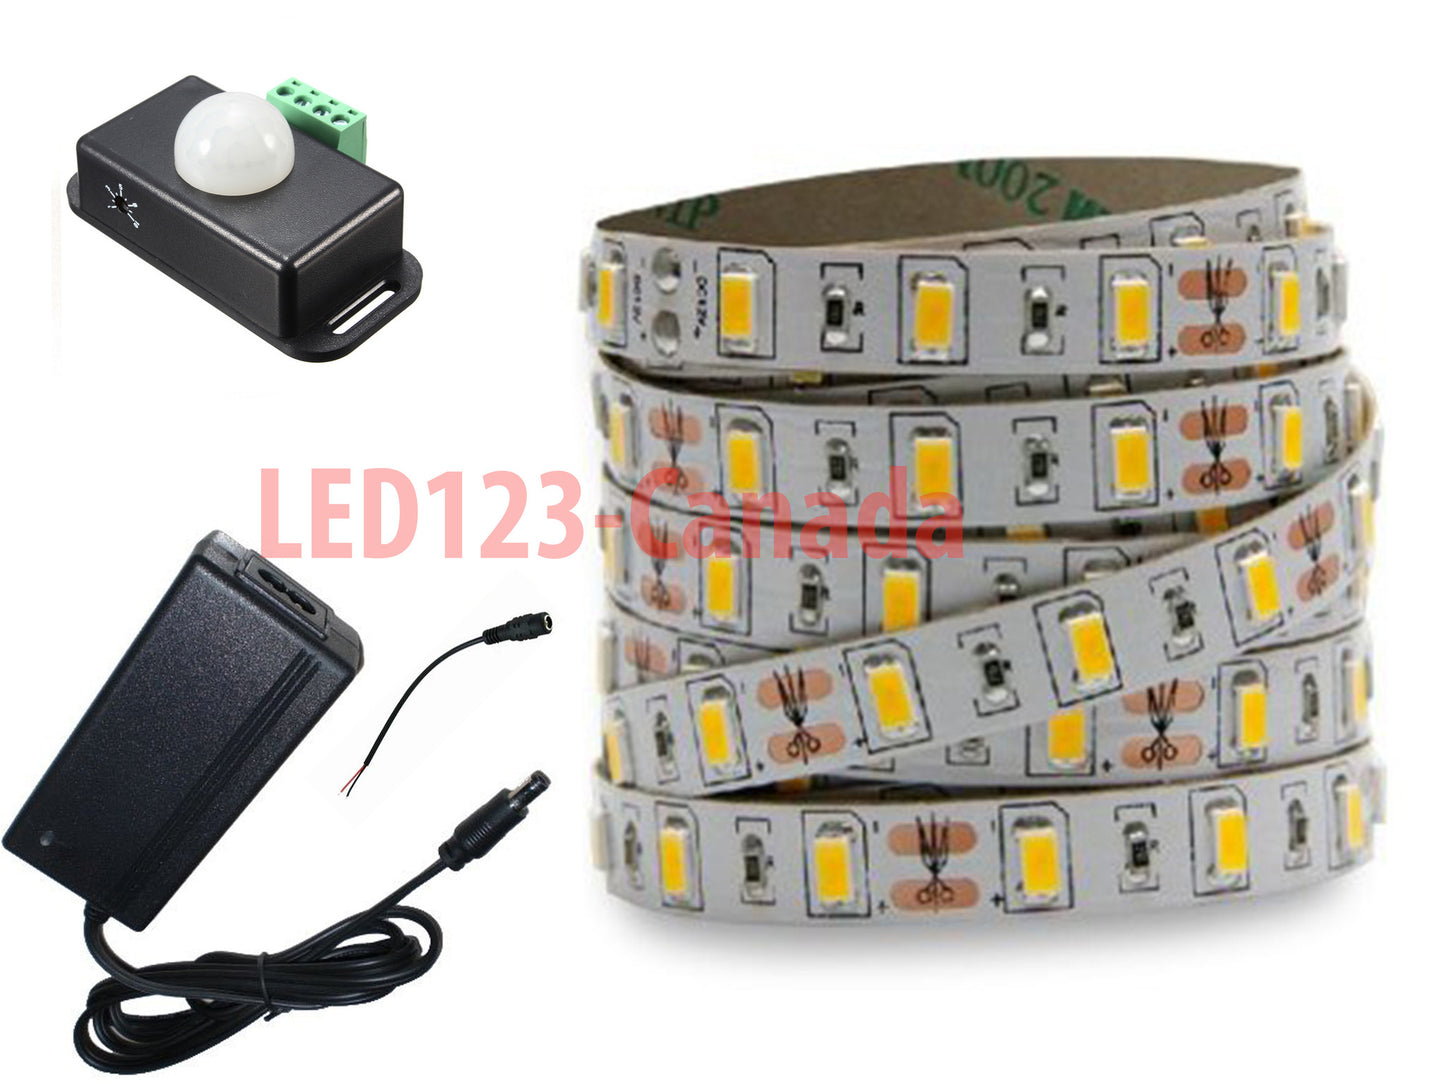 16.4ft/5M 5630 300LEDs FLEXIBLE STRIP LIGHT COMPLETE KIT/ HIGHT QUALITY WITH cUL APPROVED POWER SUPPLY WITH MOTION SENSOR